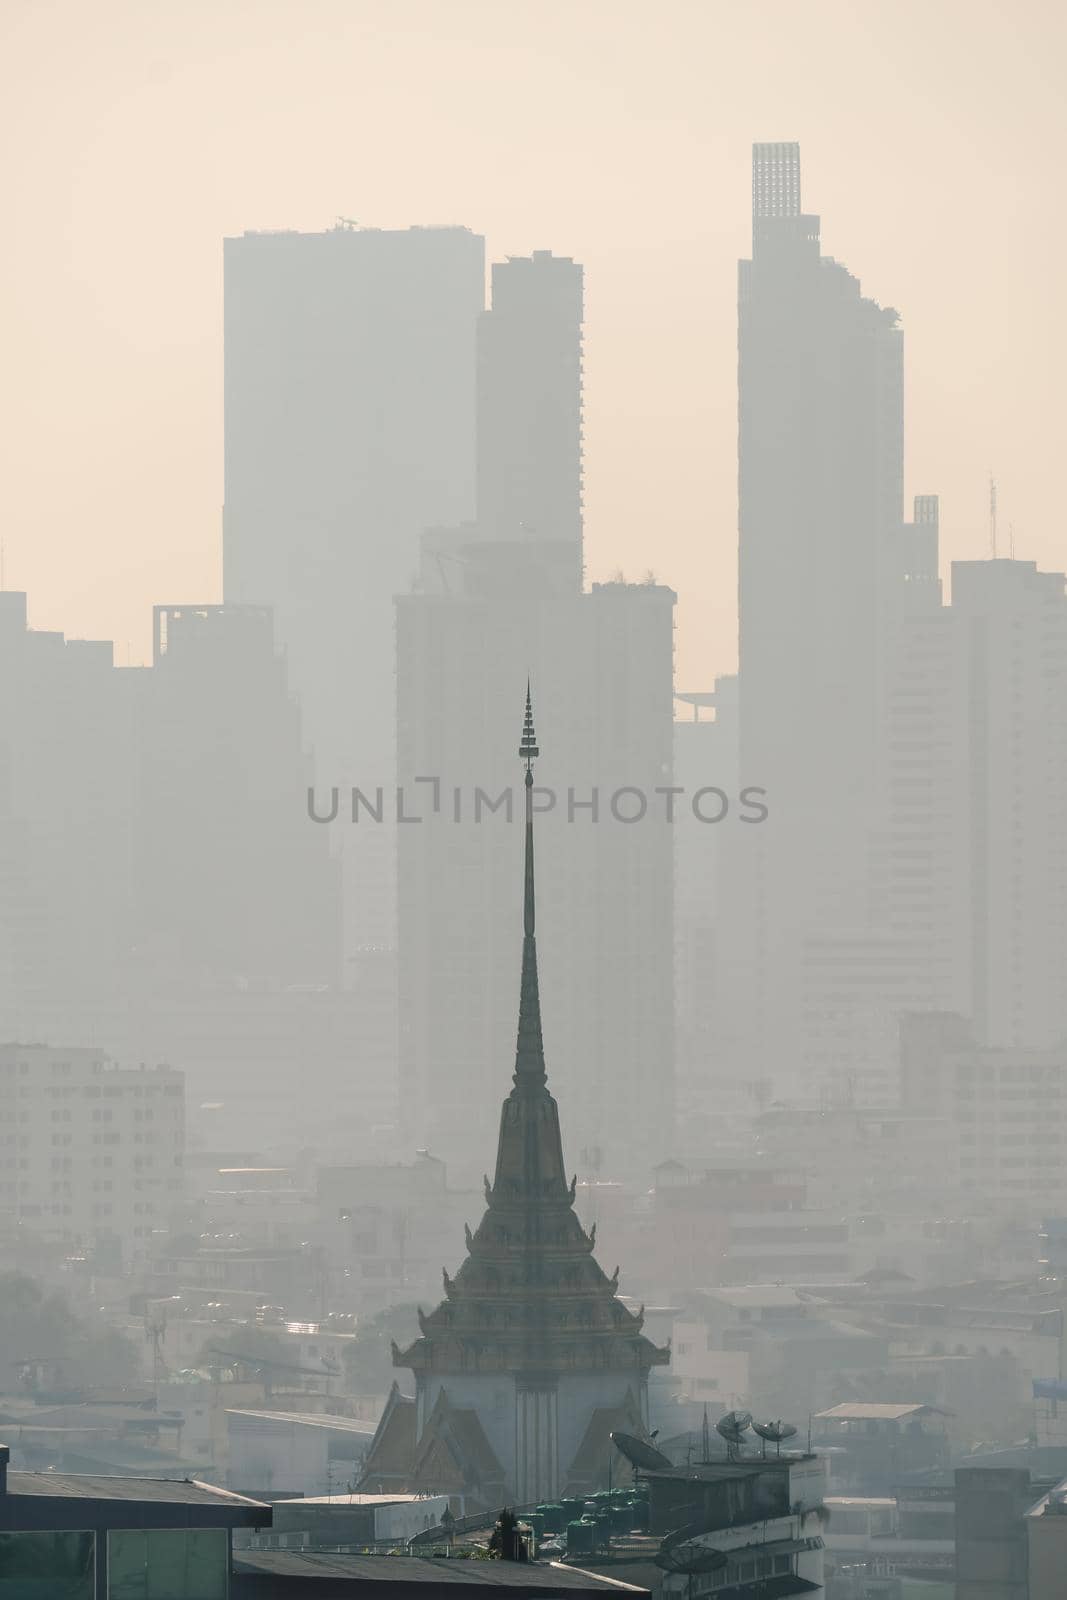 Problem air pollution at hazardous levels with PM 2.5 dust, smog or haze, low visibility in Bangkok city ,Thailand
 by toa55